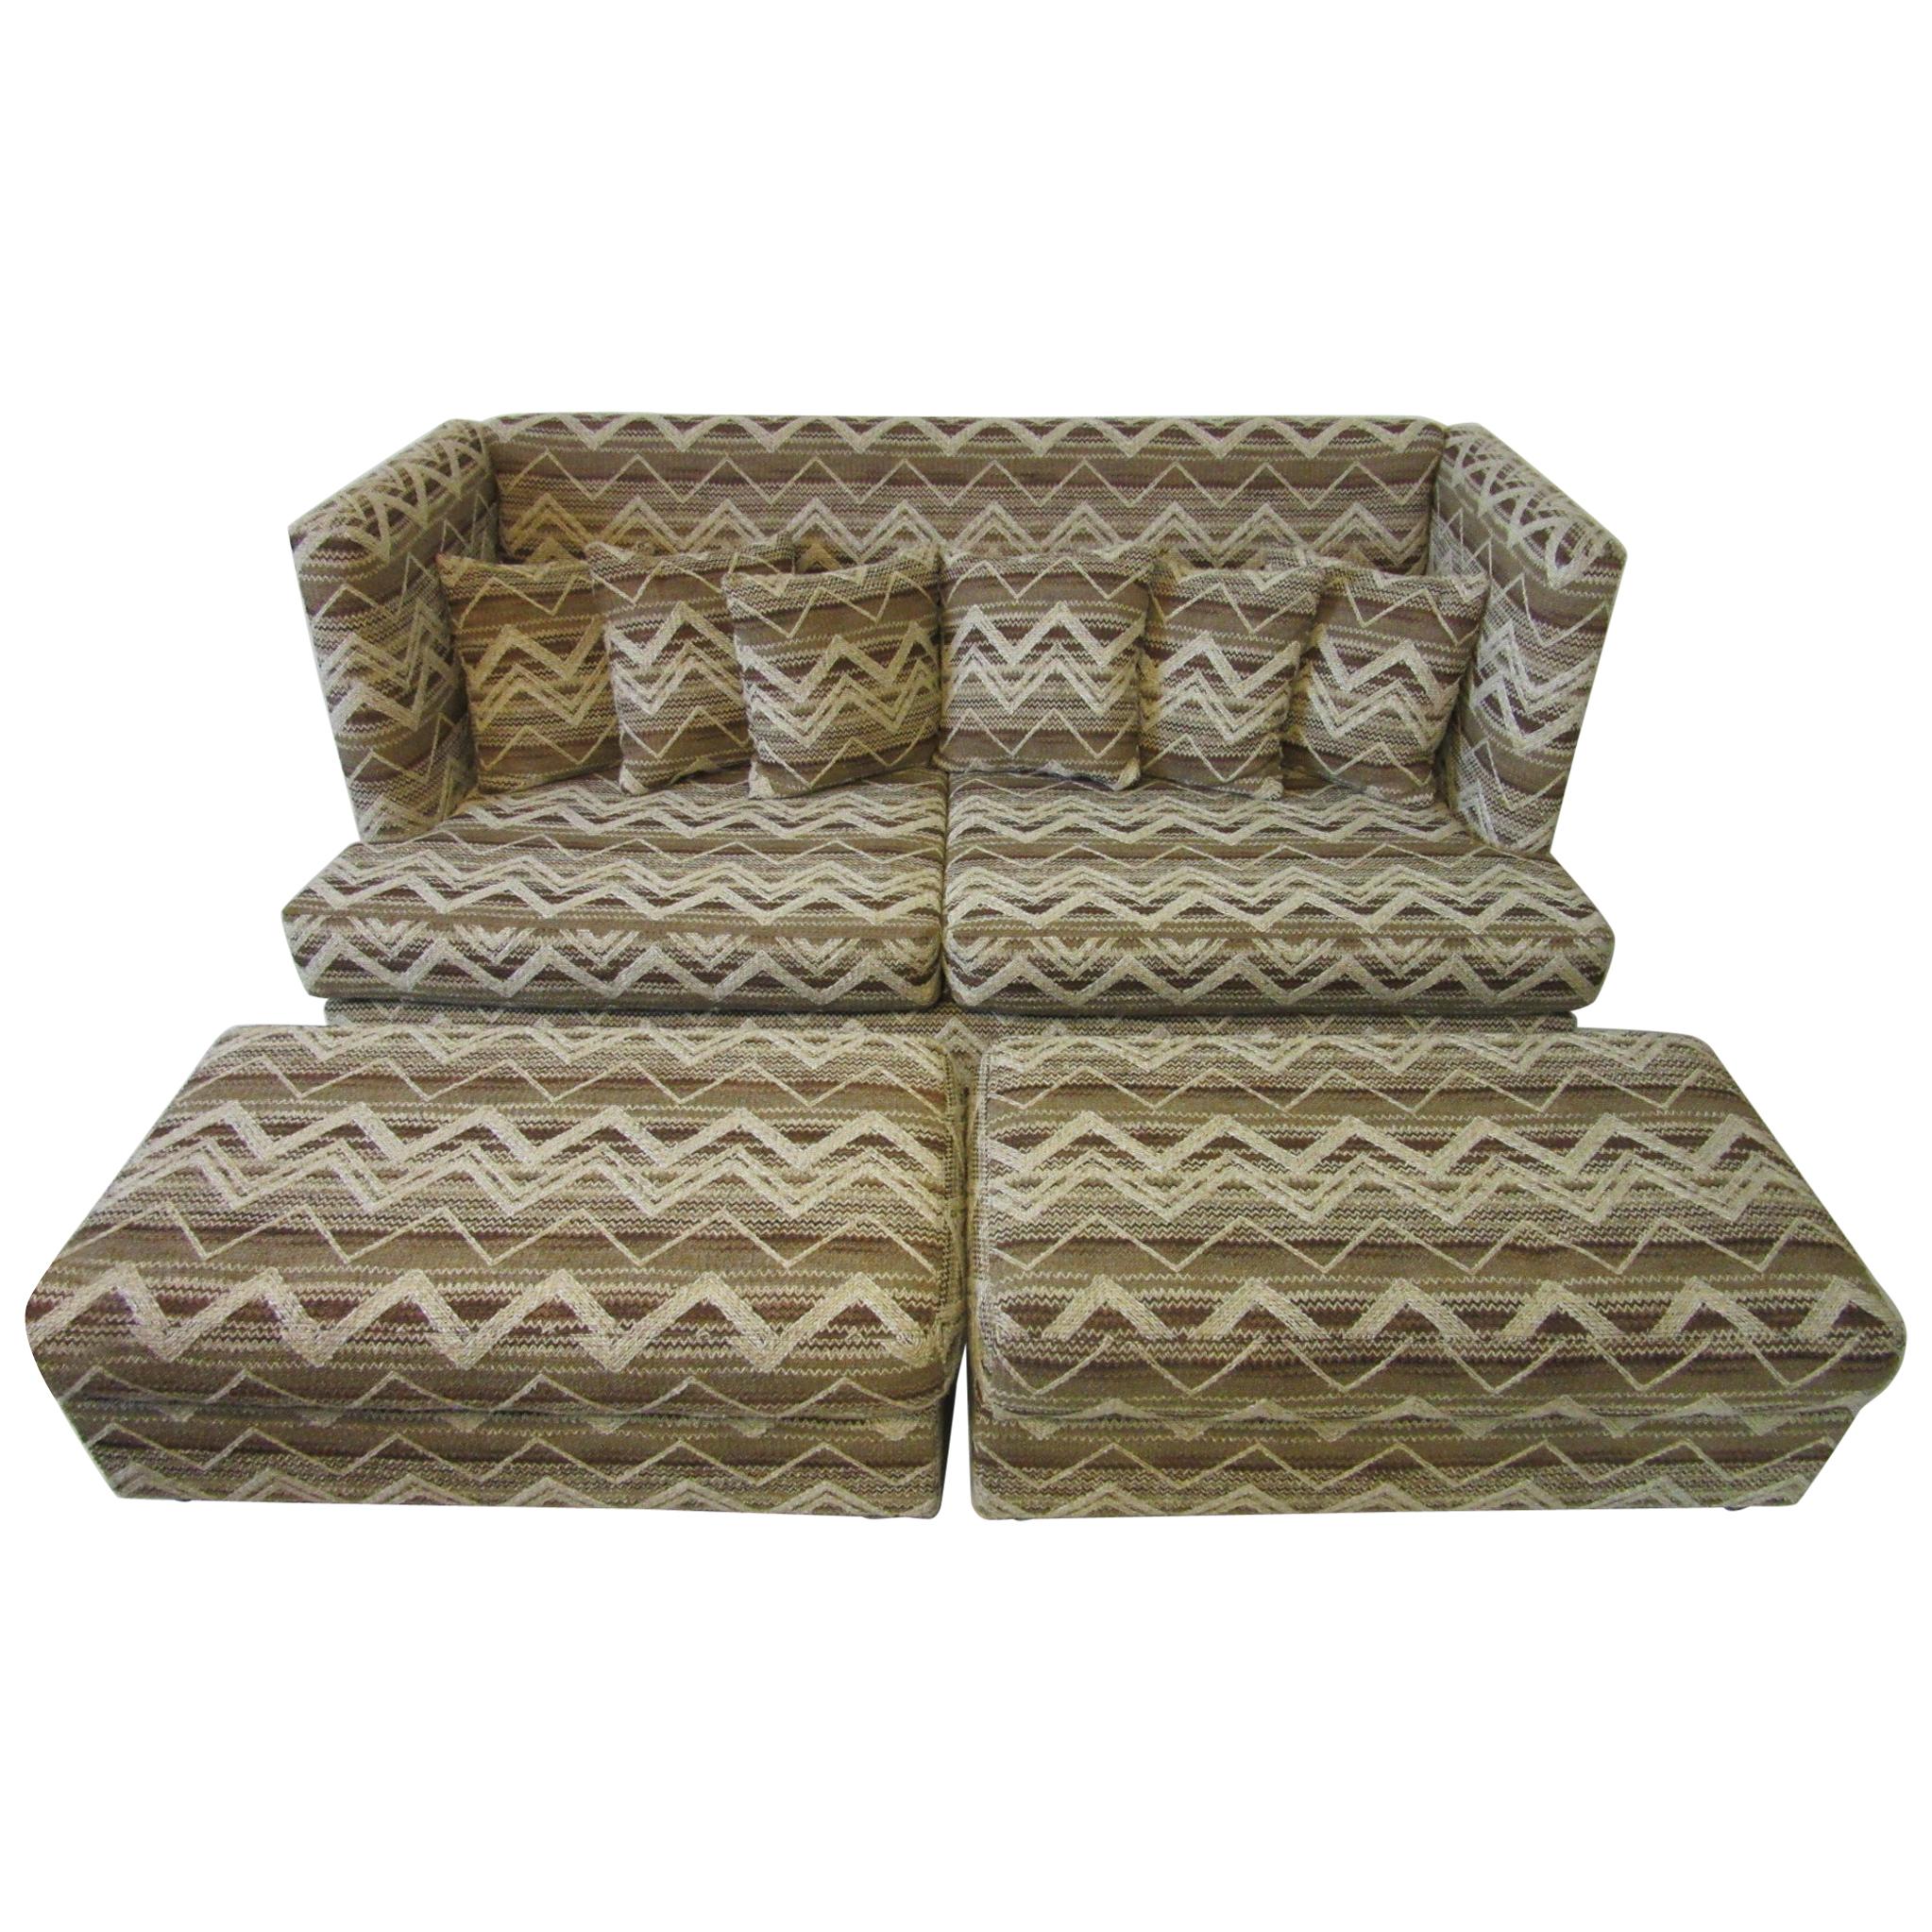 Milo Baughman Shelter Sofa and Matching Storage Ottomans for Thayer Coggin